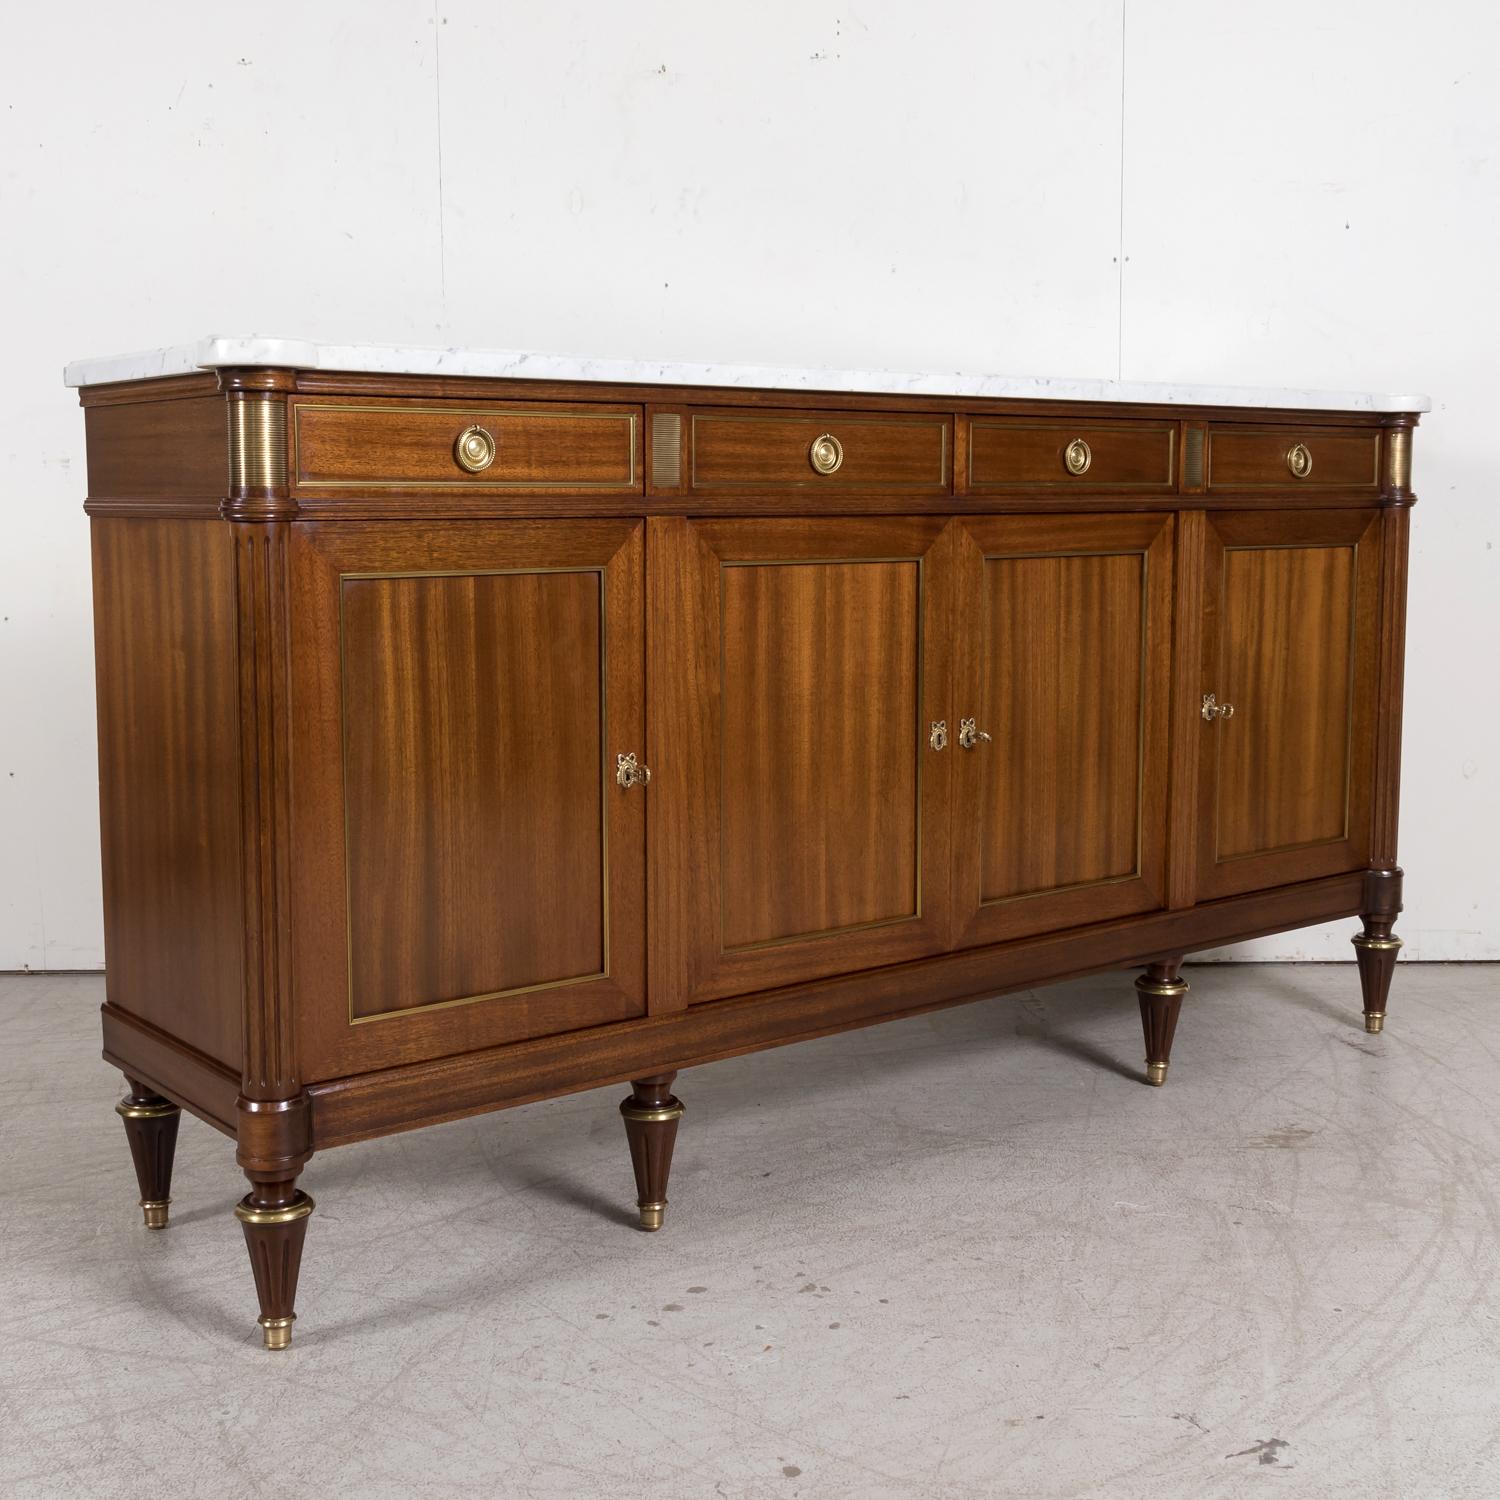 Early 20th Century Antique French Louis XVI Style Mahogany Enfilade Buffet with Carrara Marble Top